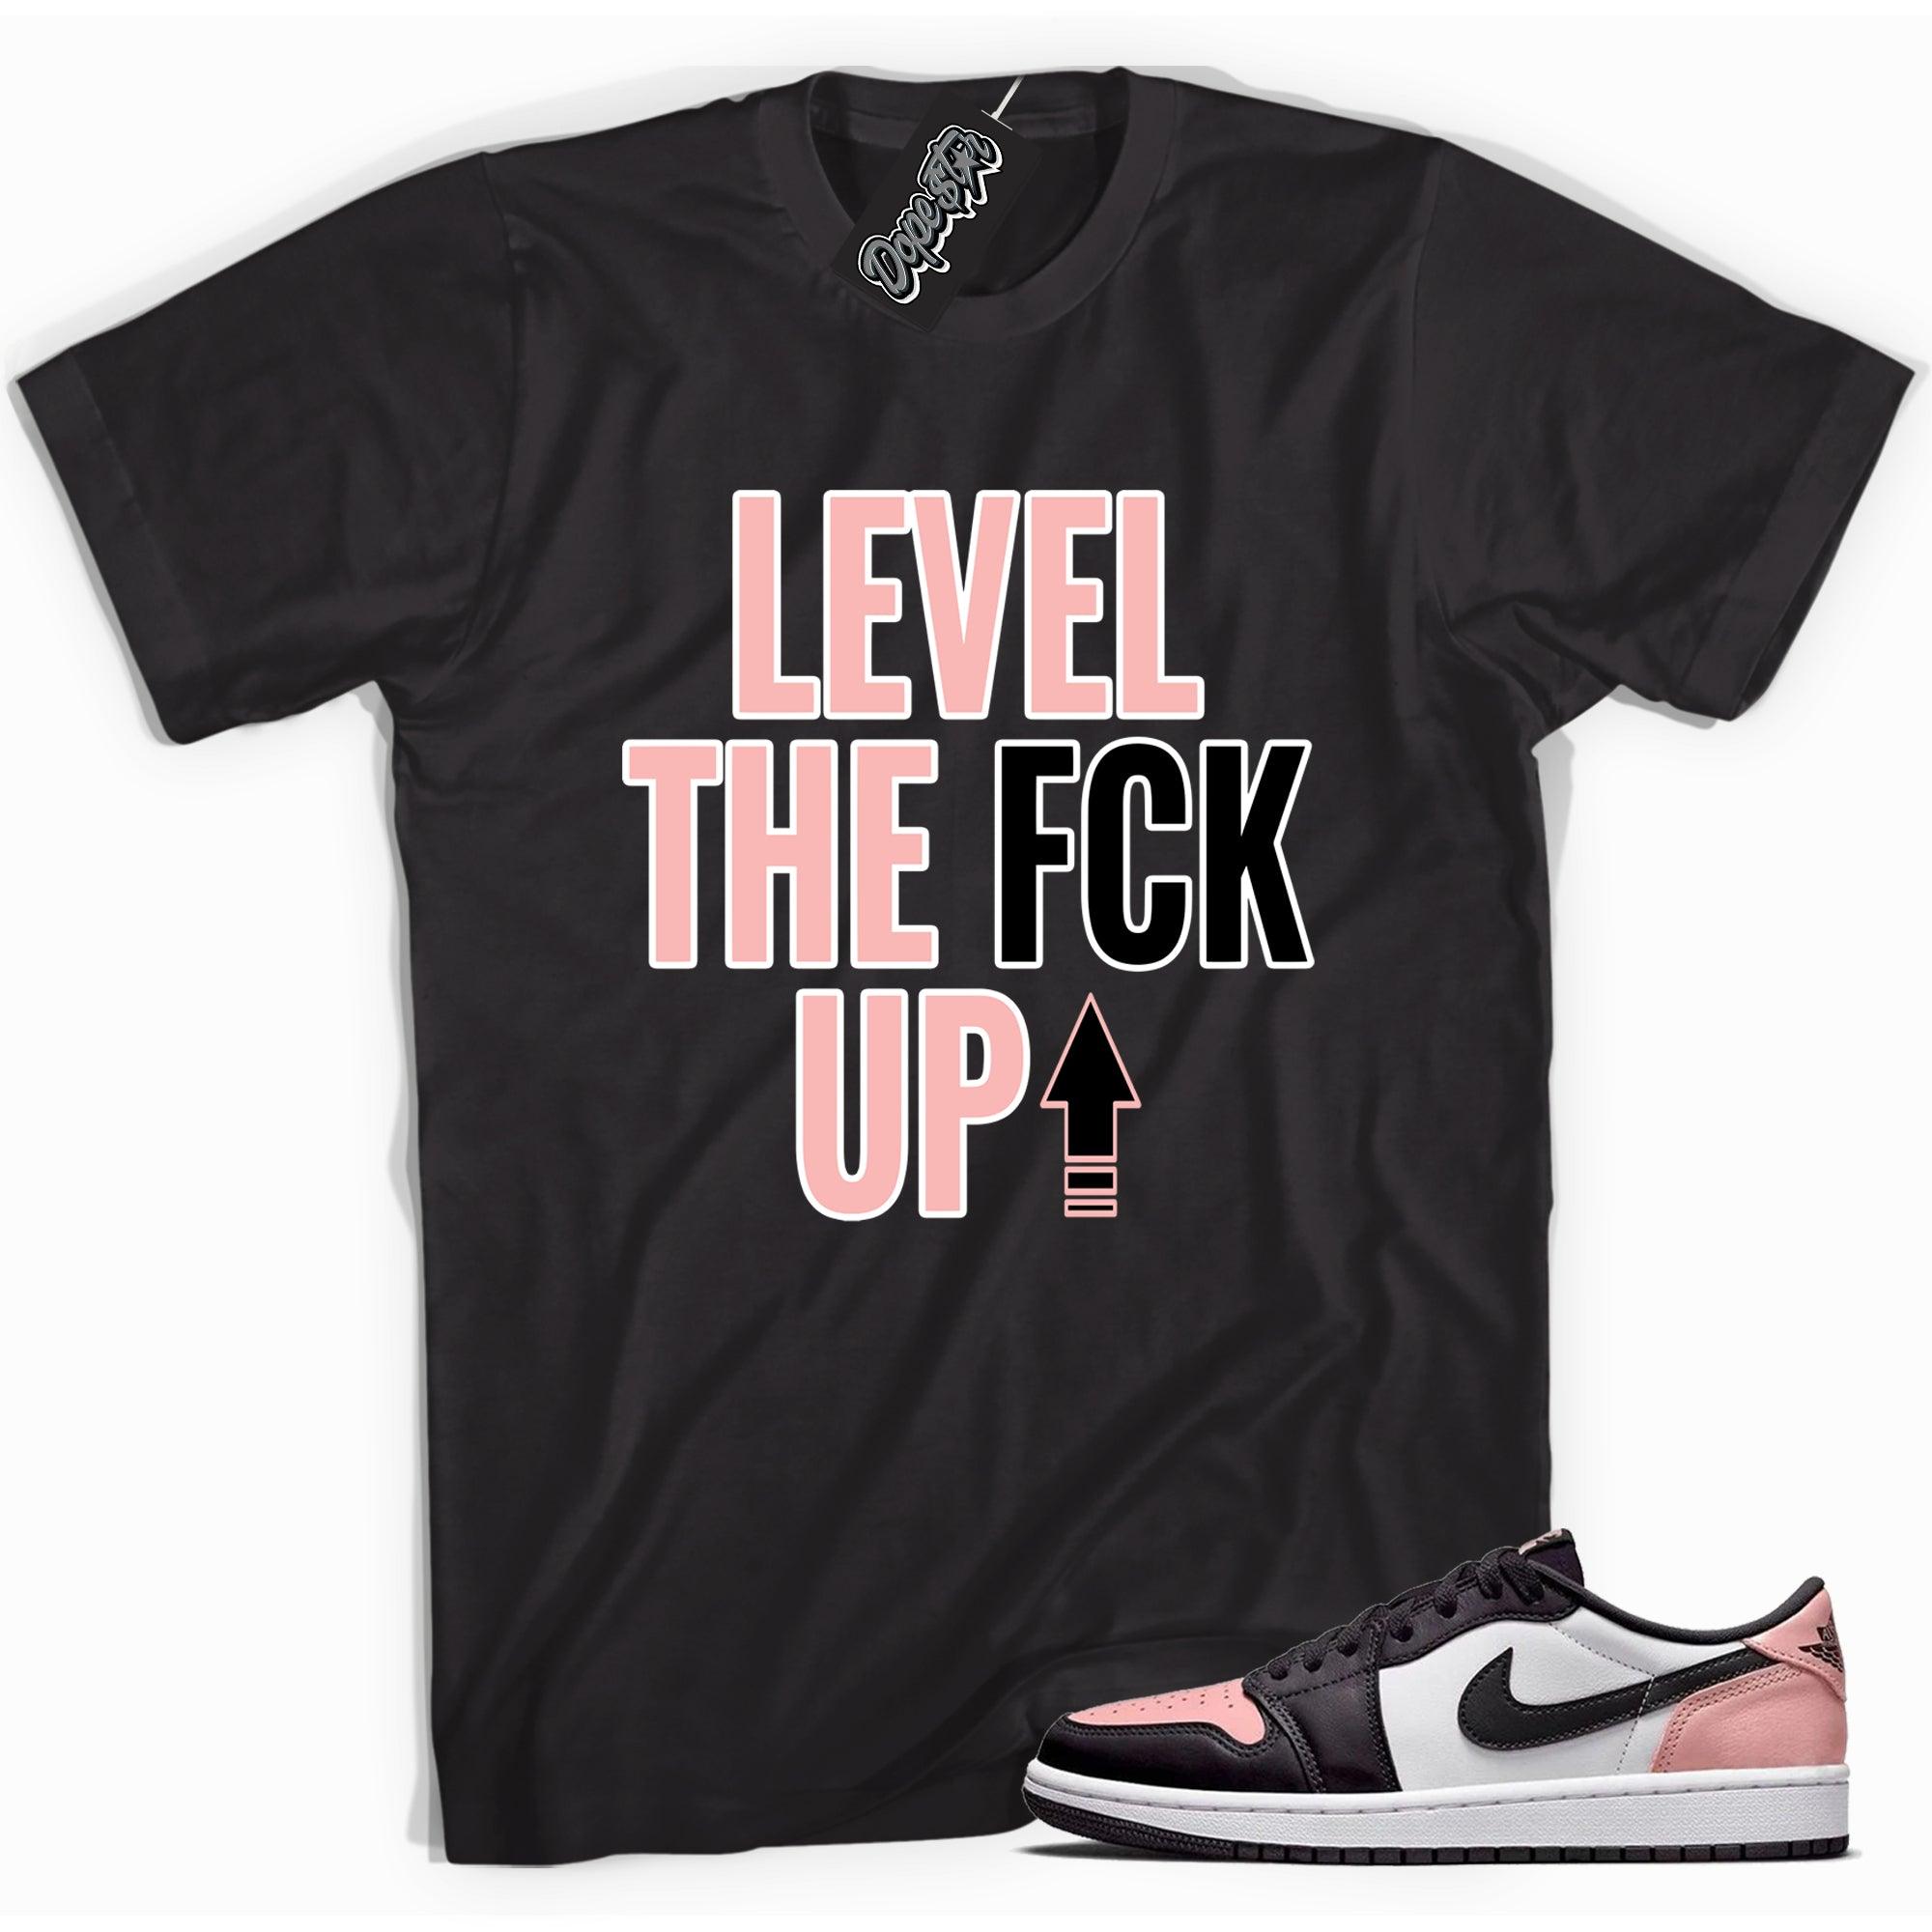 Cool black graphic tee with 'Level Up' print, that perfectly matches Air Jordan 1 Bleached Coral sneakers.